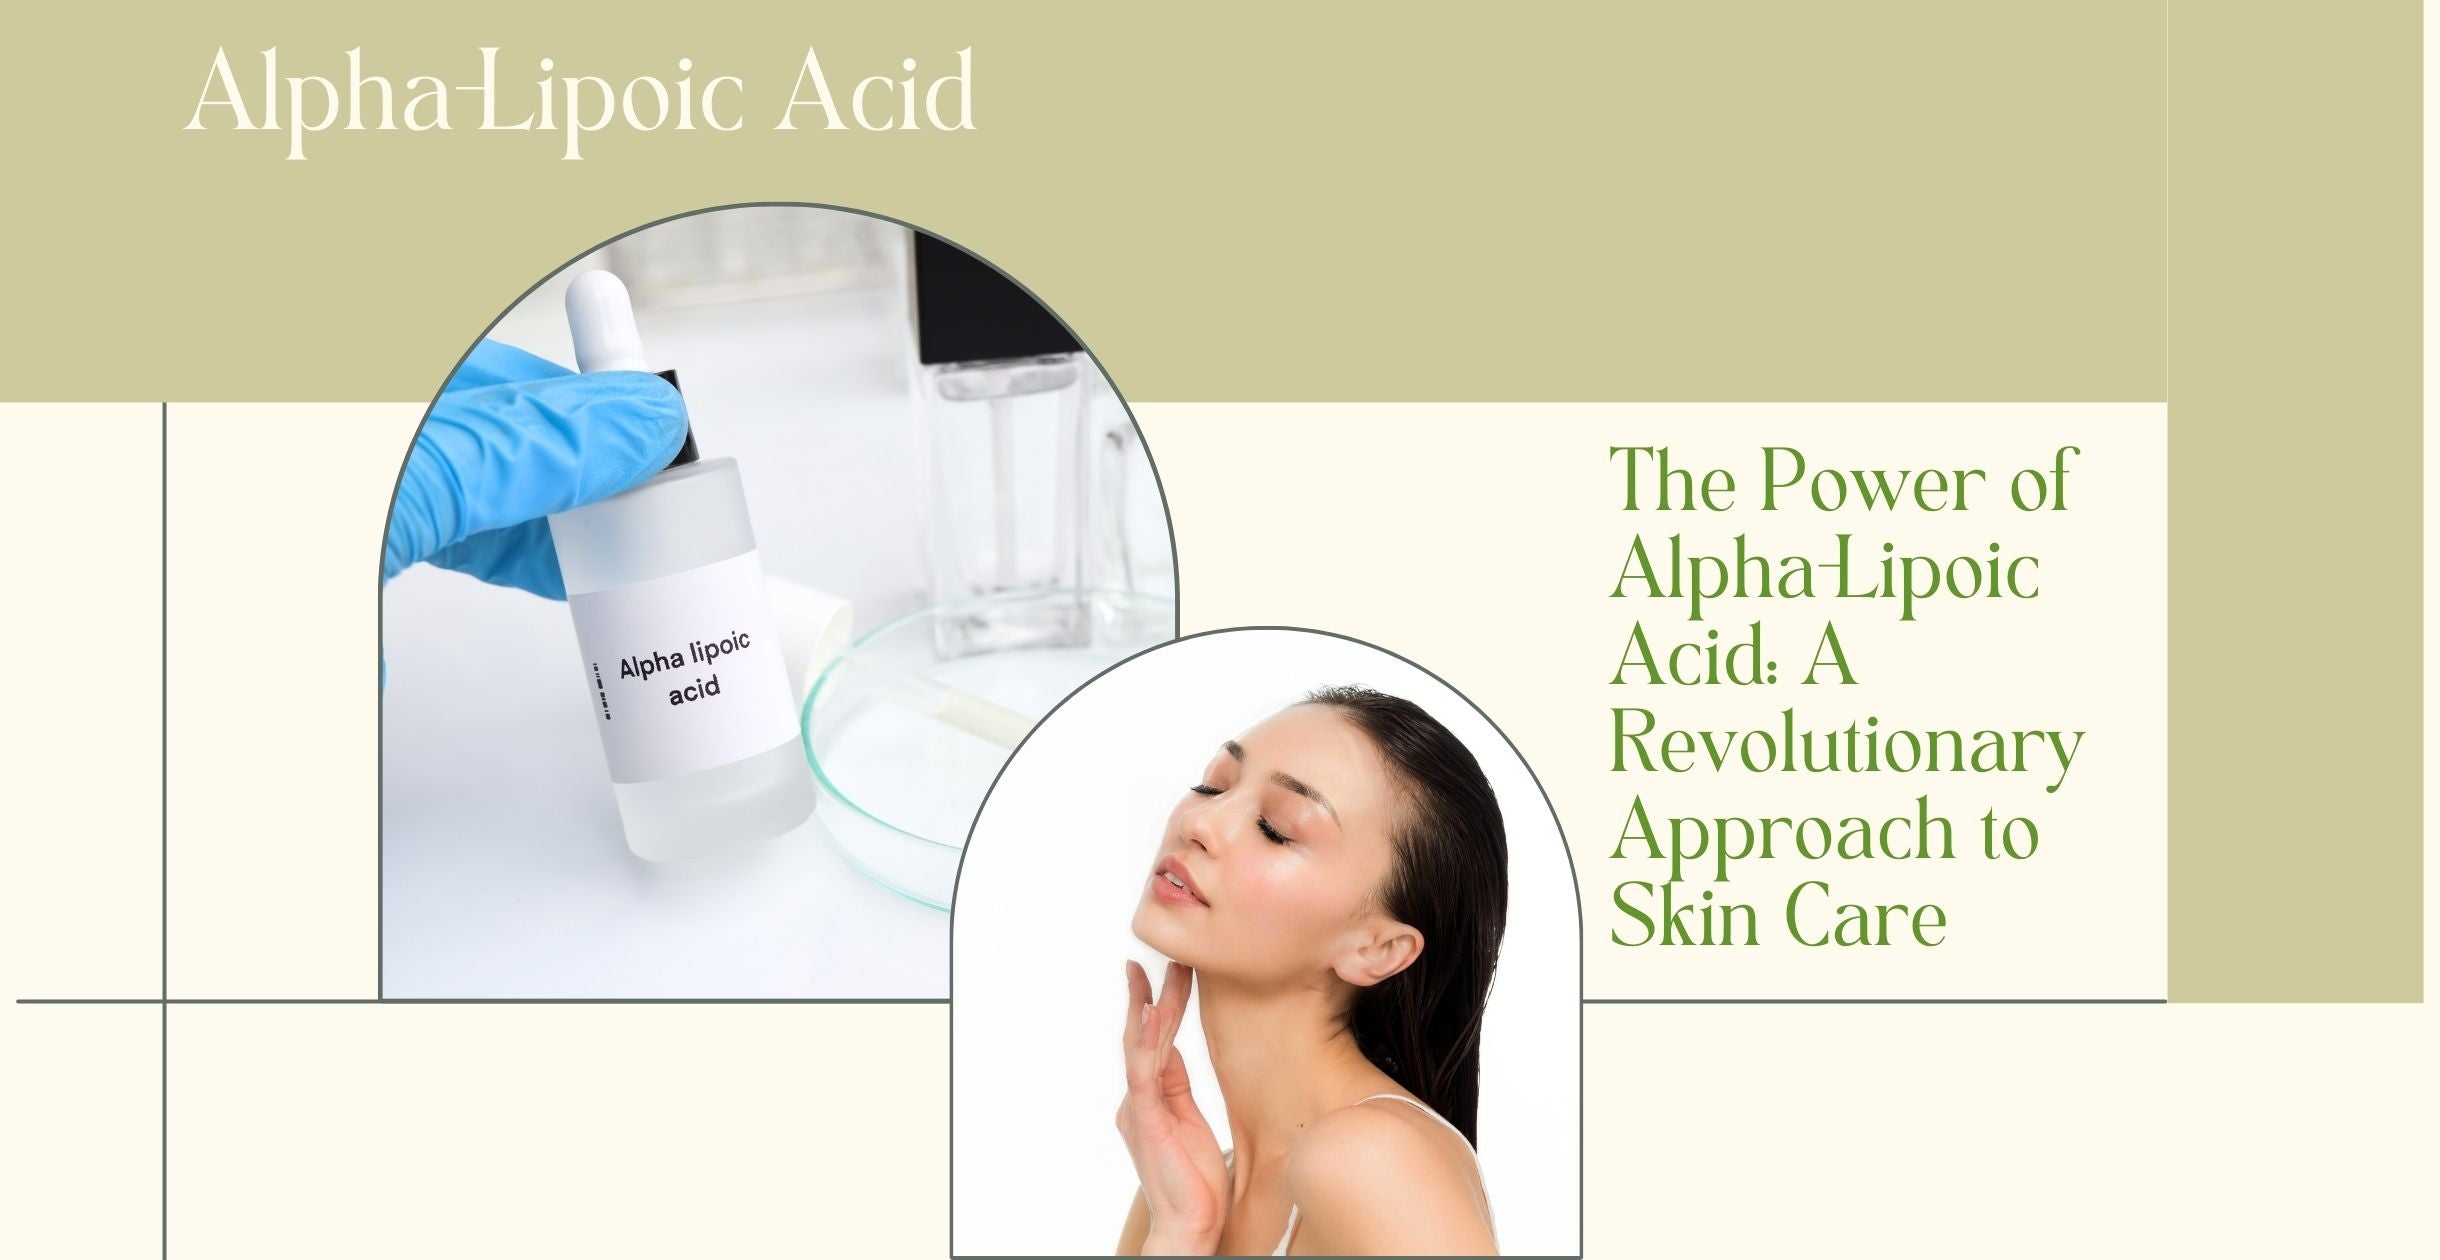 The Power of Alpha-Lipoic Acid: A Revolutionary Approach to Skin Care